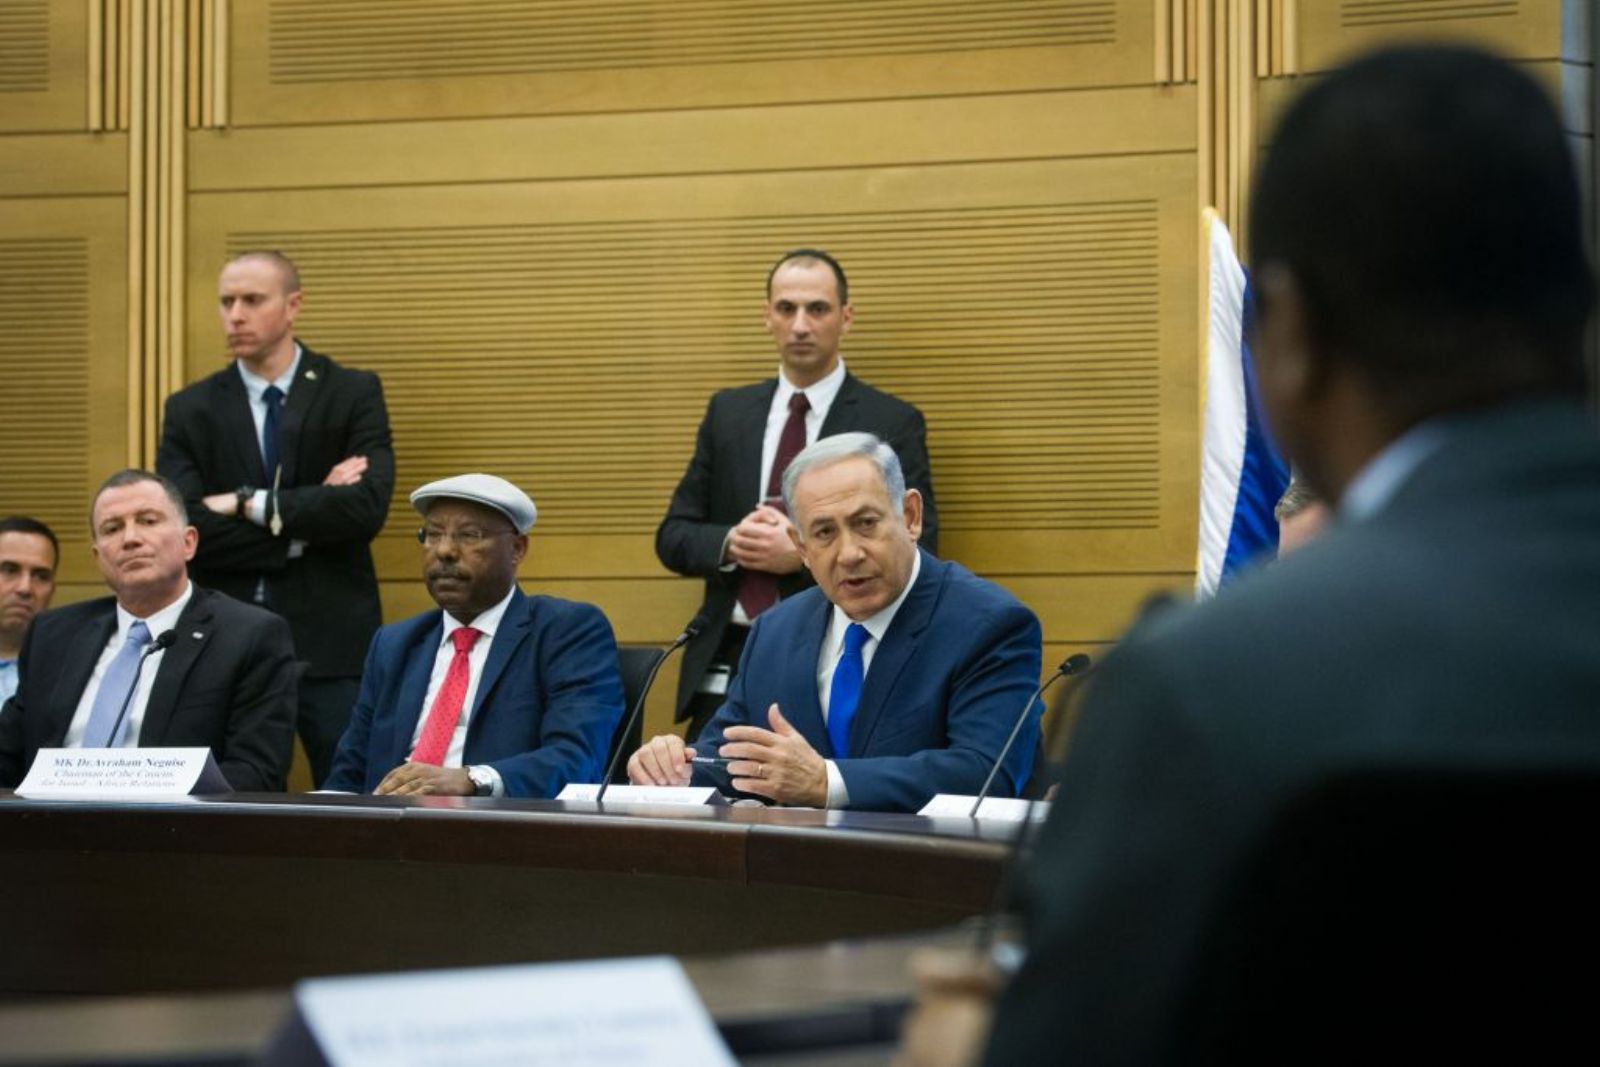 Five African leaders visit the Knesset